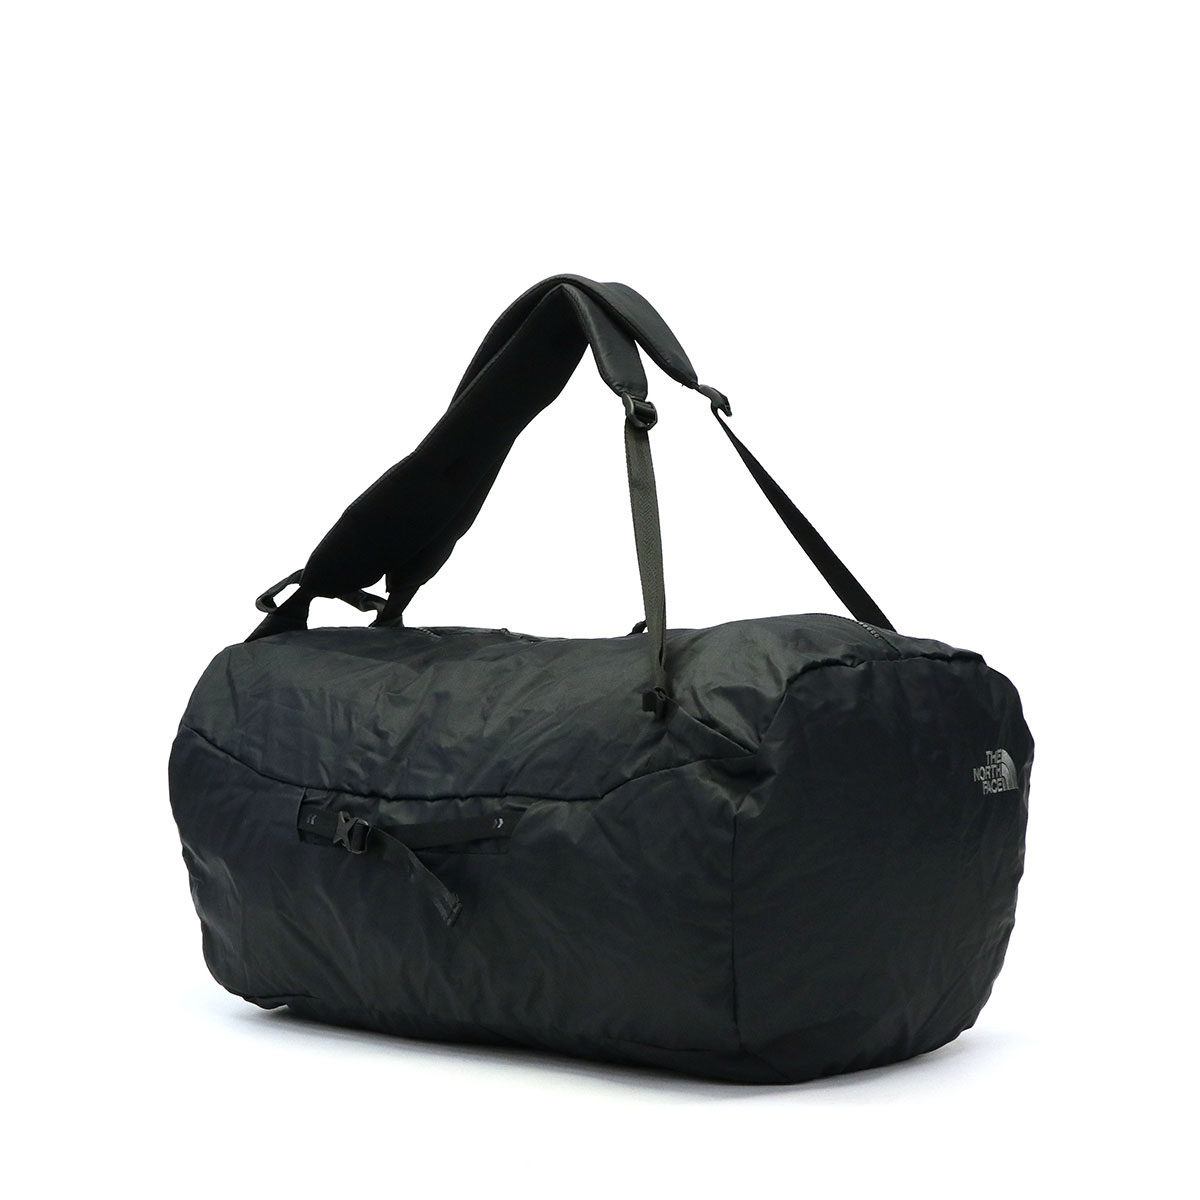 2254.THE NORTH FACE GLAM DUFFEL 35L